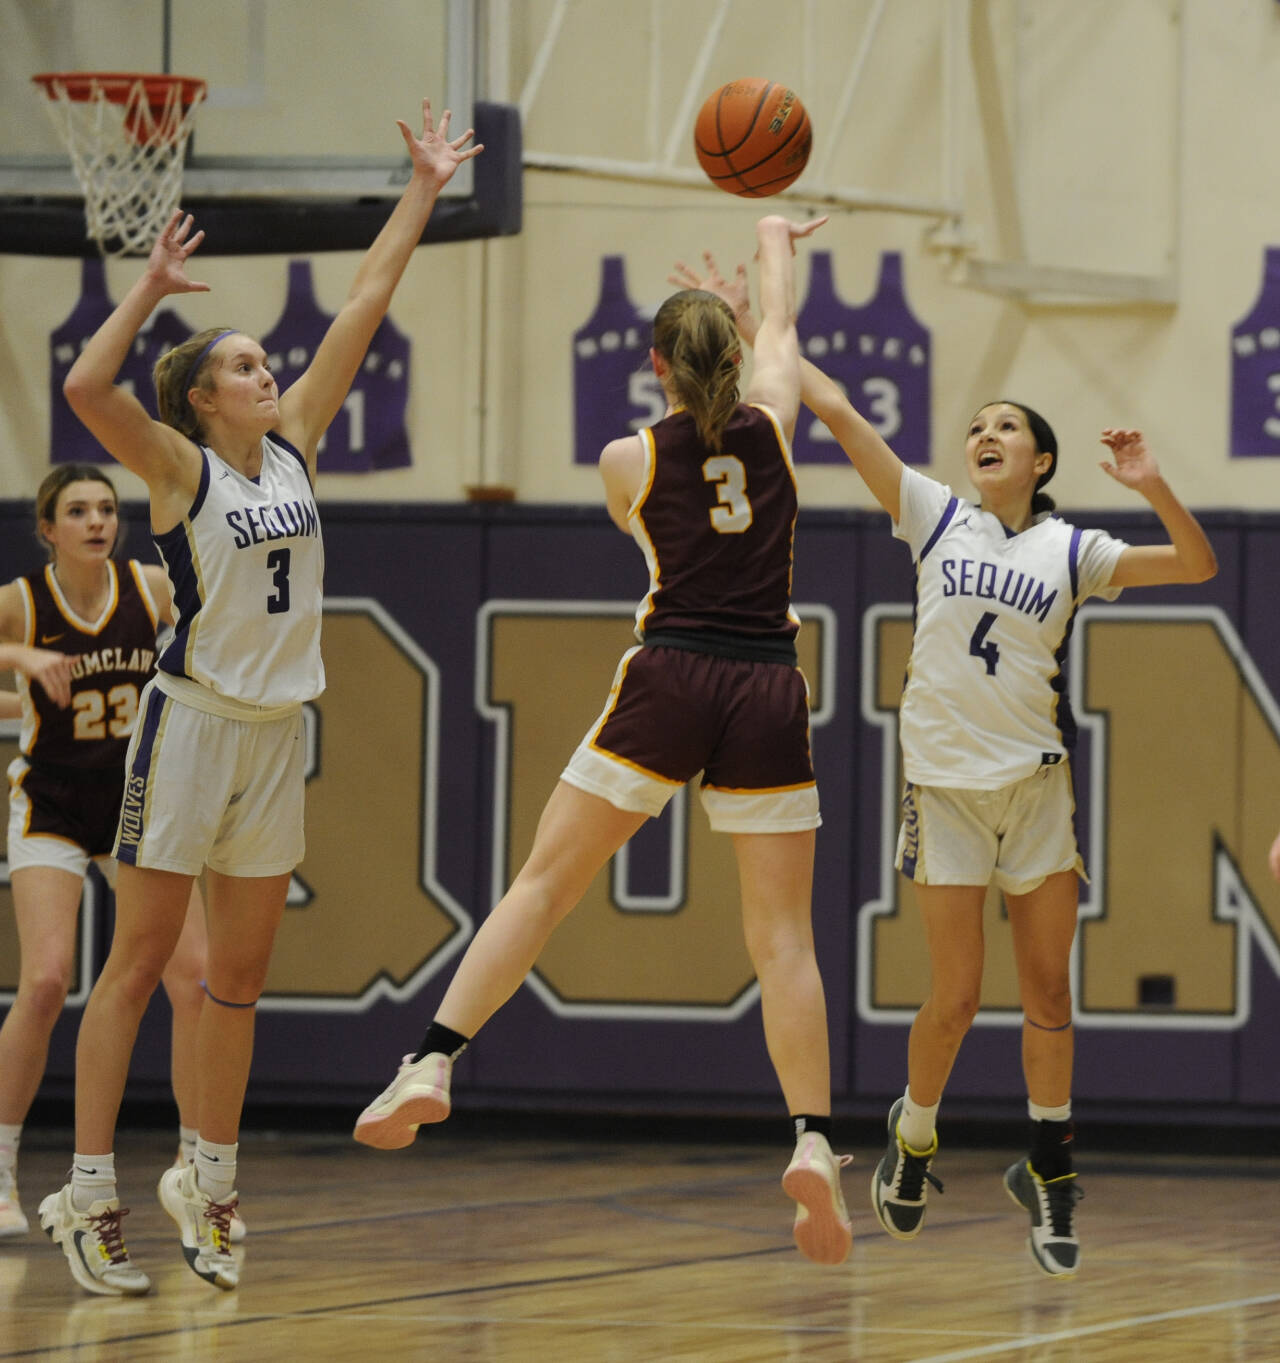 Sequim Gazette file photo by Michael Dashiell / Sequim’s Jolene Vaara (3) and Gracie Chartraw (4) defend the basket at Enumclaw’s Kalee Swanson passes to teammate Ava Smith in a bi-district tournament game on Feb. 14 in Sequim. Vaara was selected the Olympic League’s Most Valuable Player and Defensive Player of the Year while Chartraw was named to the all-league first team.